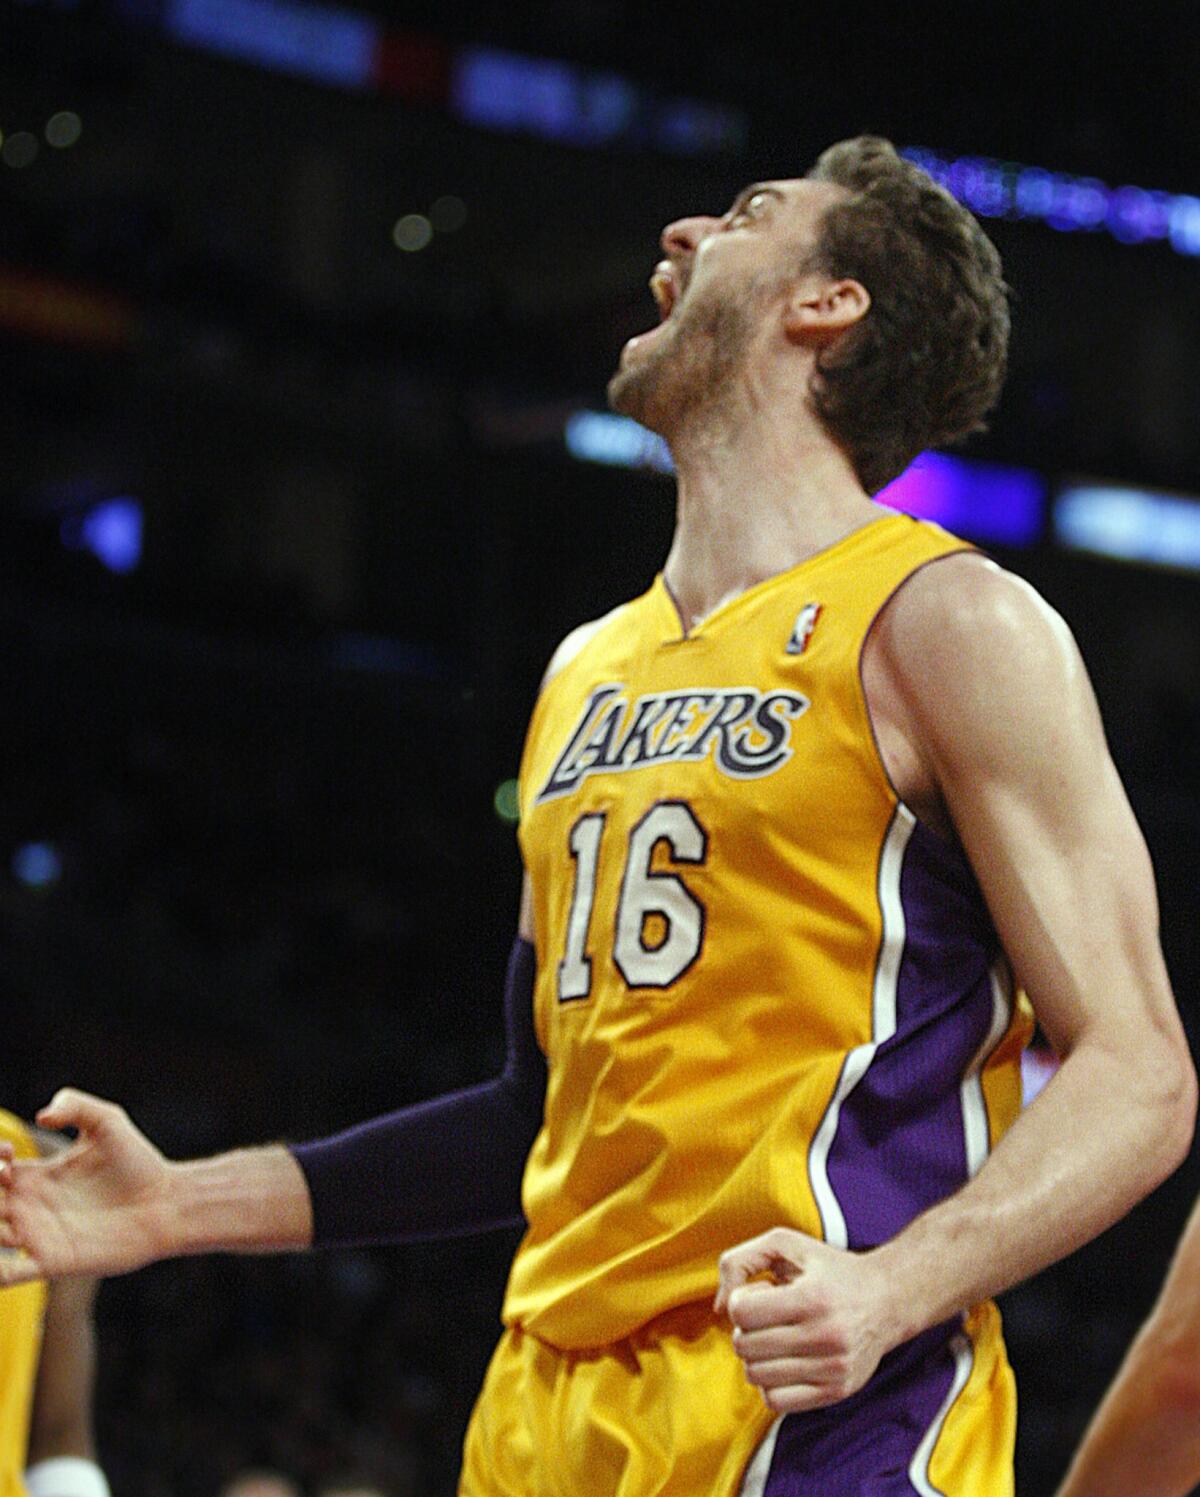 Lakers power forward Pau Gasol shouts in frustration during a play in the first half of Wednesday's game against the Spurs.